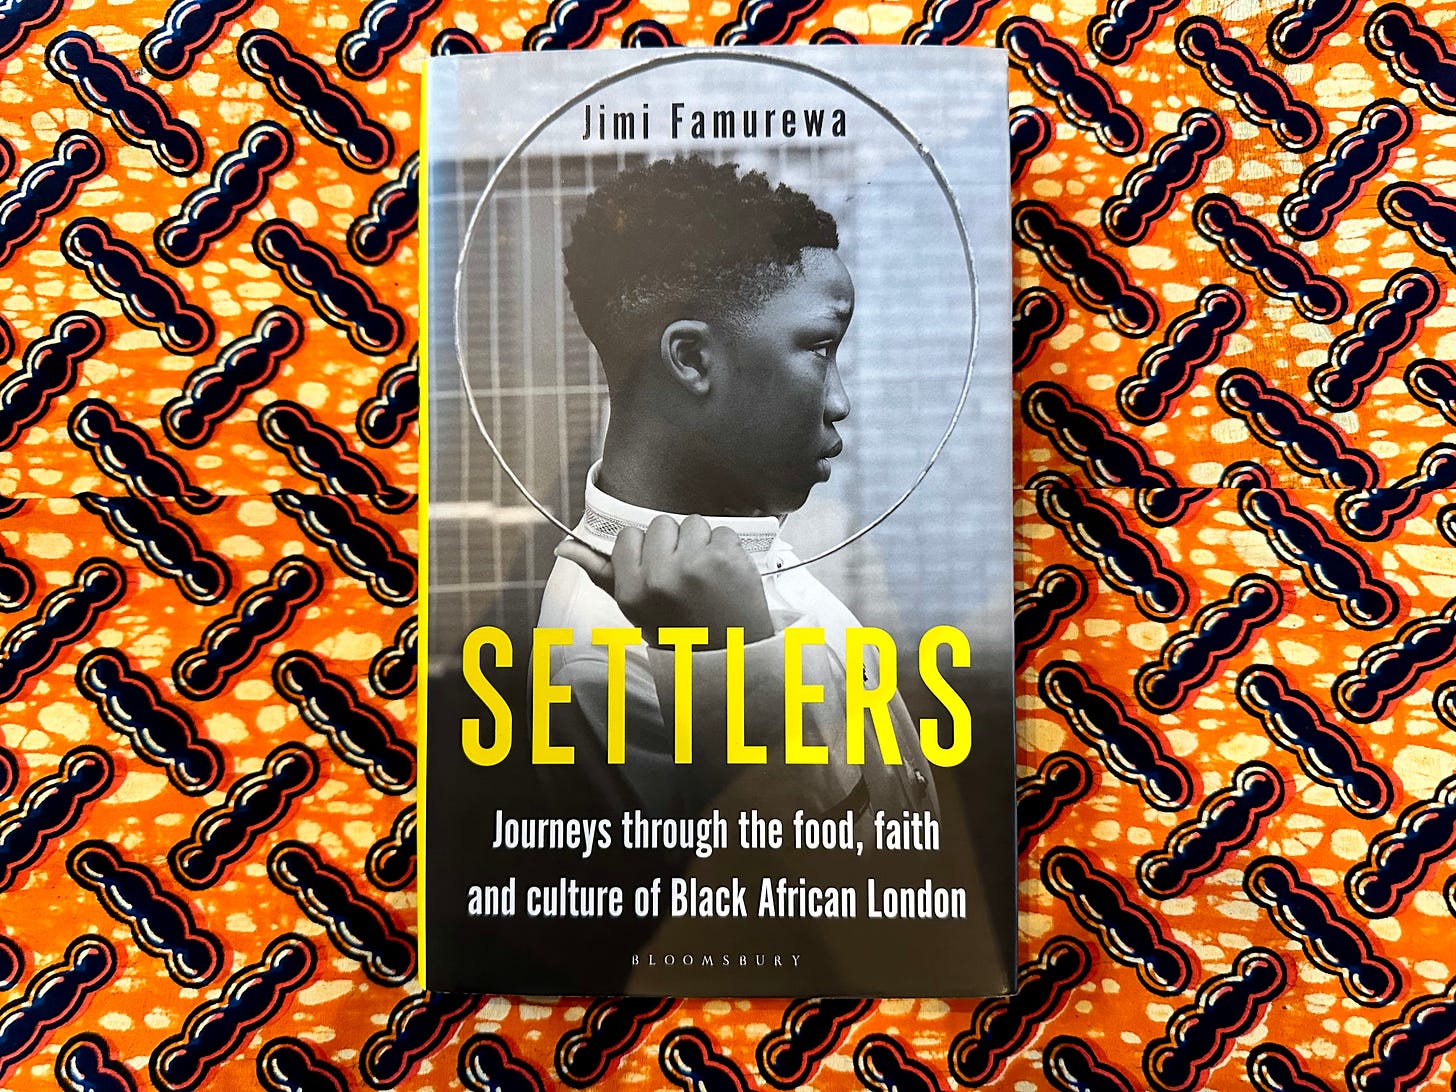 Picture of a book titled "Settlers", by Jimi Famurewa, on a vibrant orange and black African wax print cloth. The cover shows a young Black African boy in profile holding a circular metal hoop that frames his head. The books titles fills the bottom third of the cover.